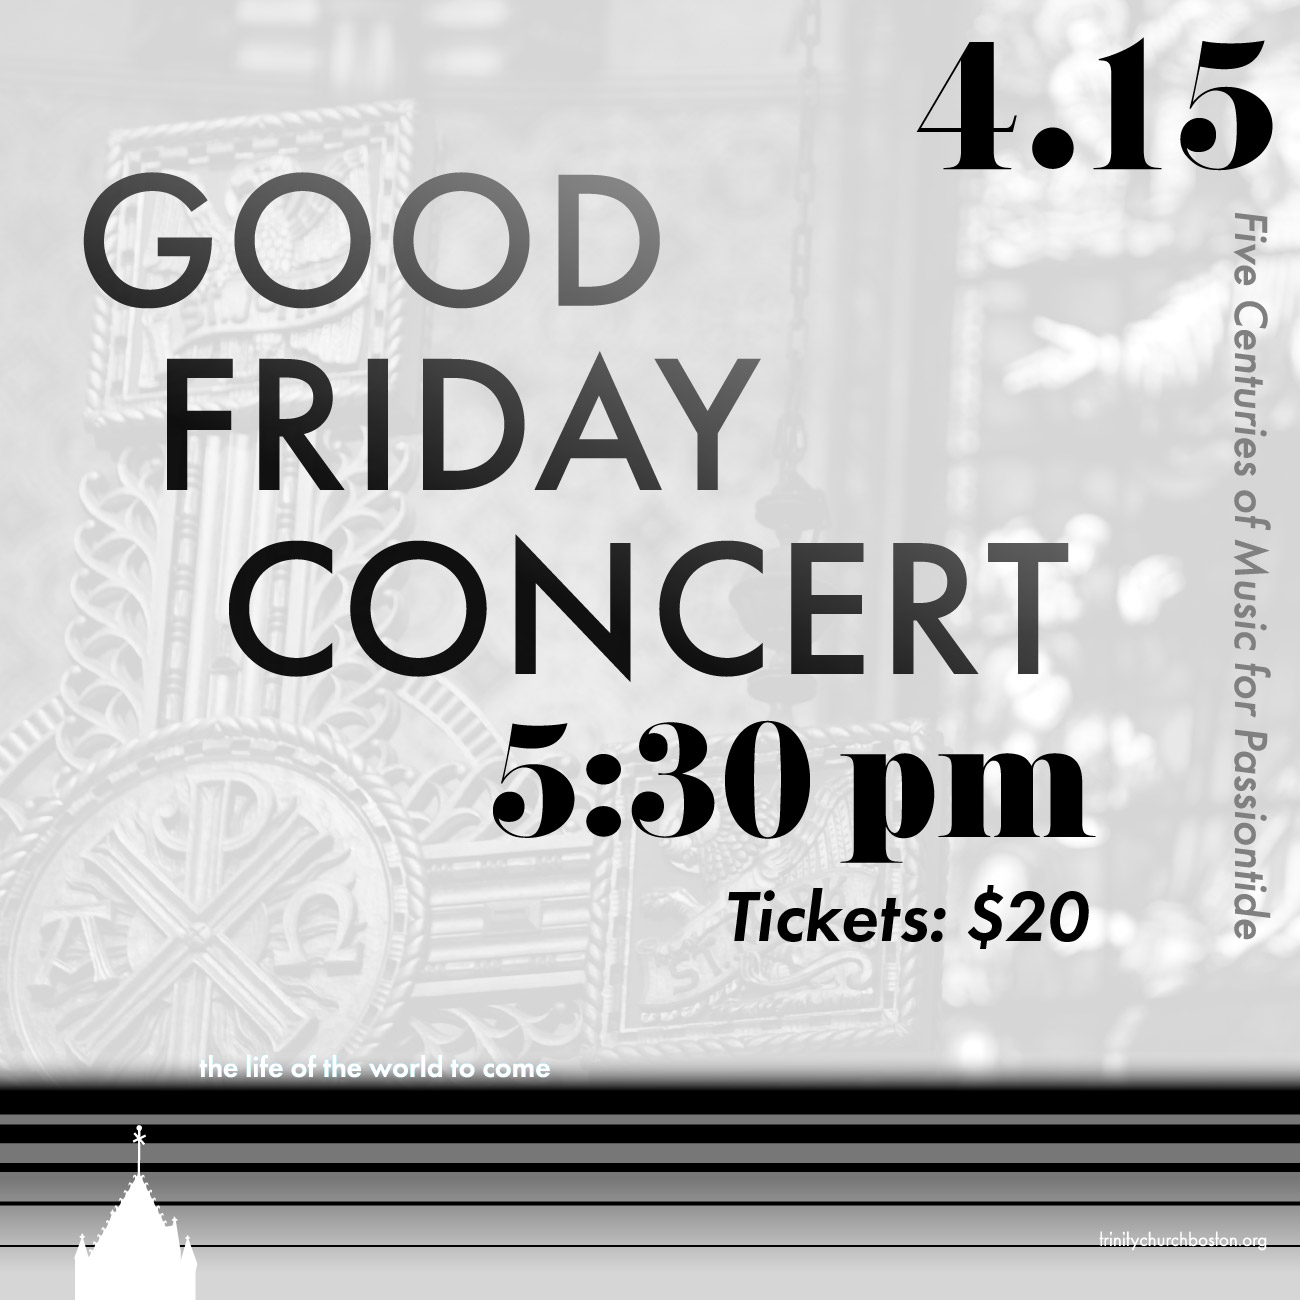 Good Friday Concert; Five Centuries of Music for Passiontide • 4/15, 5:30 pm • Tickets, $20